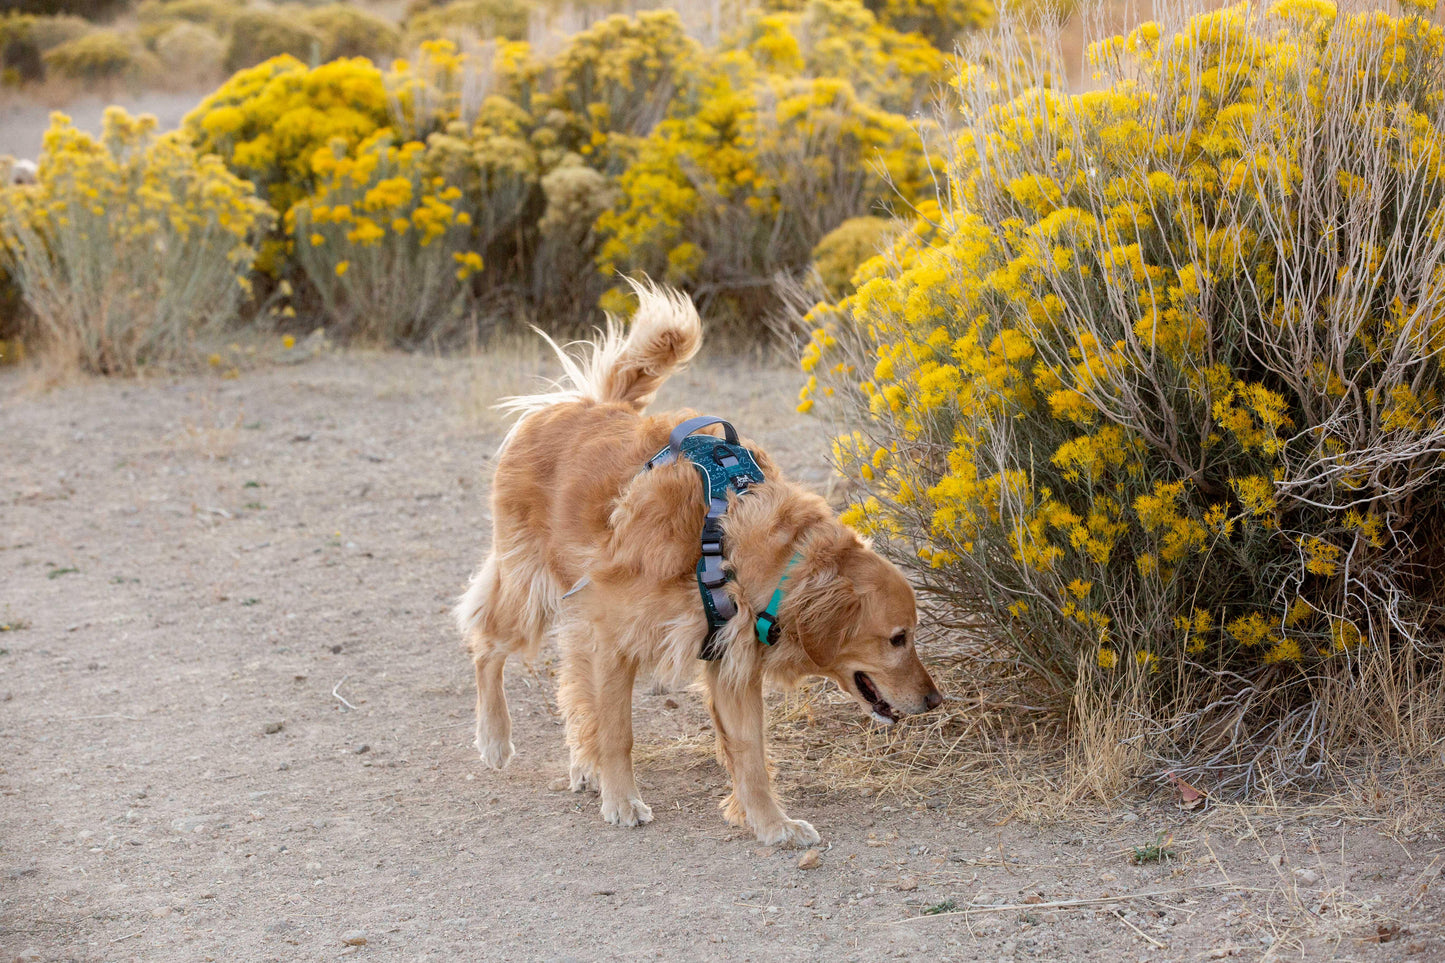 Wildside Dog Gear, wild flower hikes, dog friendly wild flower hikes, slc hikes, dog friendly utah hikes, golden retriever dog sniffing yellow bush in utah mountain hiking trail, in dog harness with handle, hiking dog harness,  dog harness escape proof dog harness green dog harness padding dog harness reviews dog harness front clip dog harness goldendoodle dog harness step in